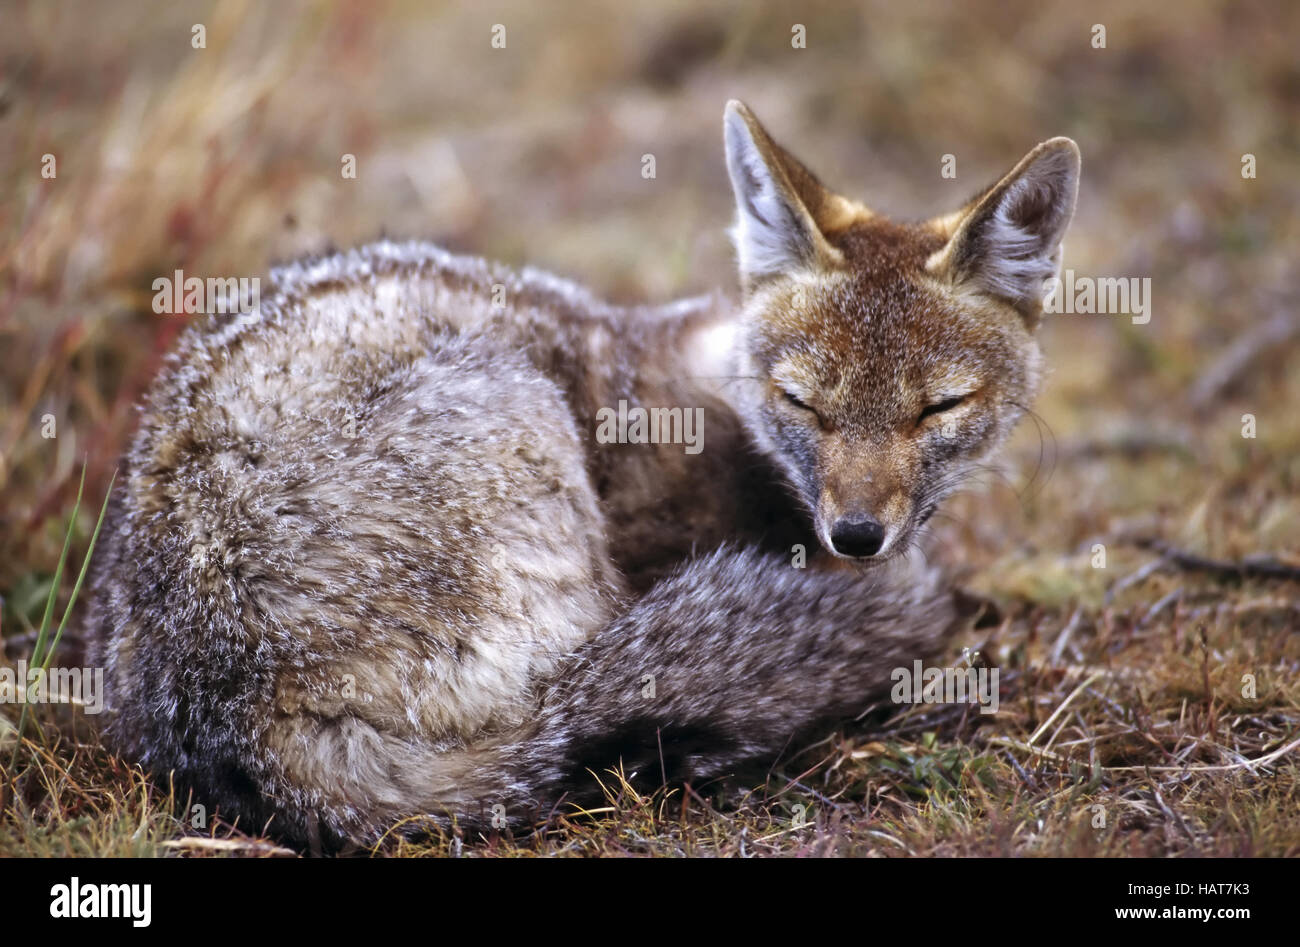 Andean fox, patagonian fox, south america Stock Photo